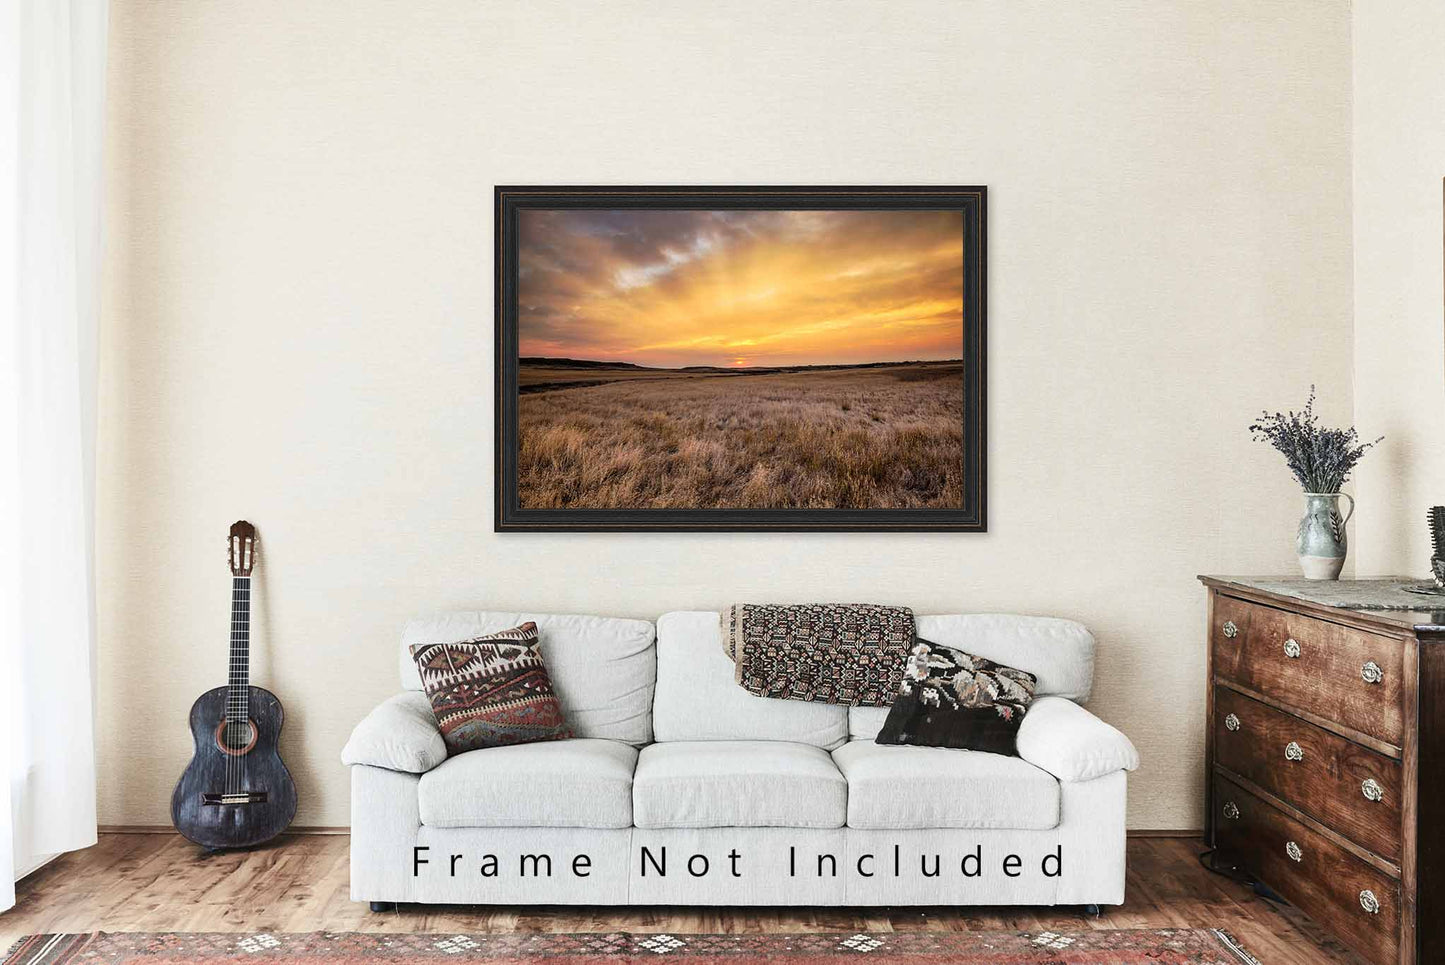 Western Wall Art Photography Print - Picture of Big Sky at Sunrise Over Prairie in Montana - Great Plains Photo Artwork Decor 4x6 to 40x60